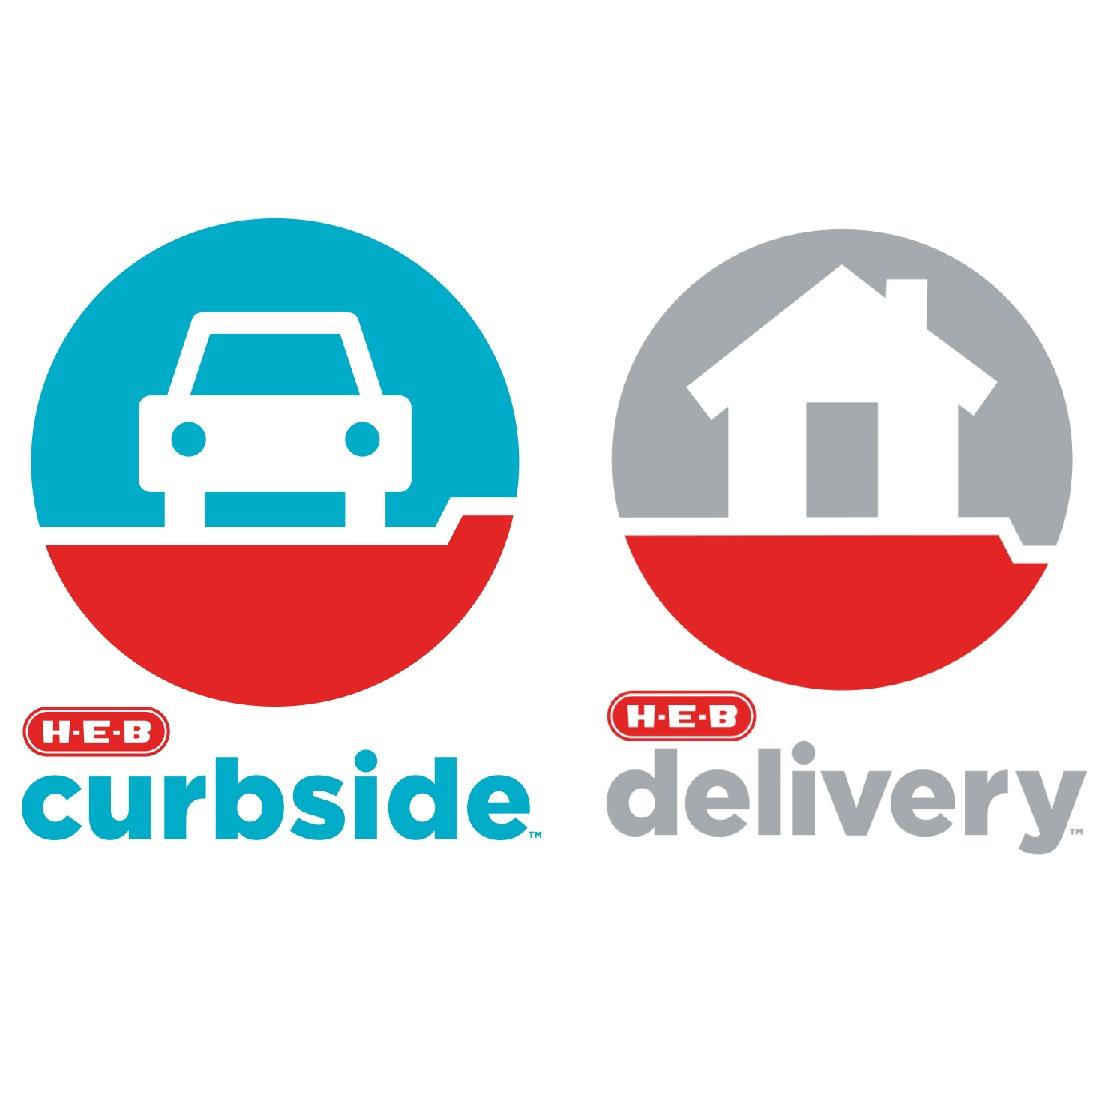 H-E-B Curbside & Grocery Delivery Logo